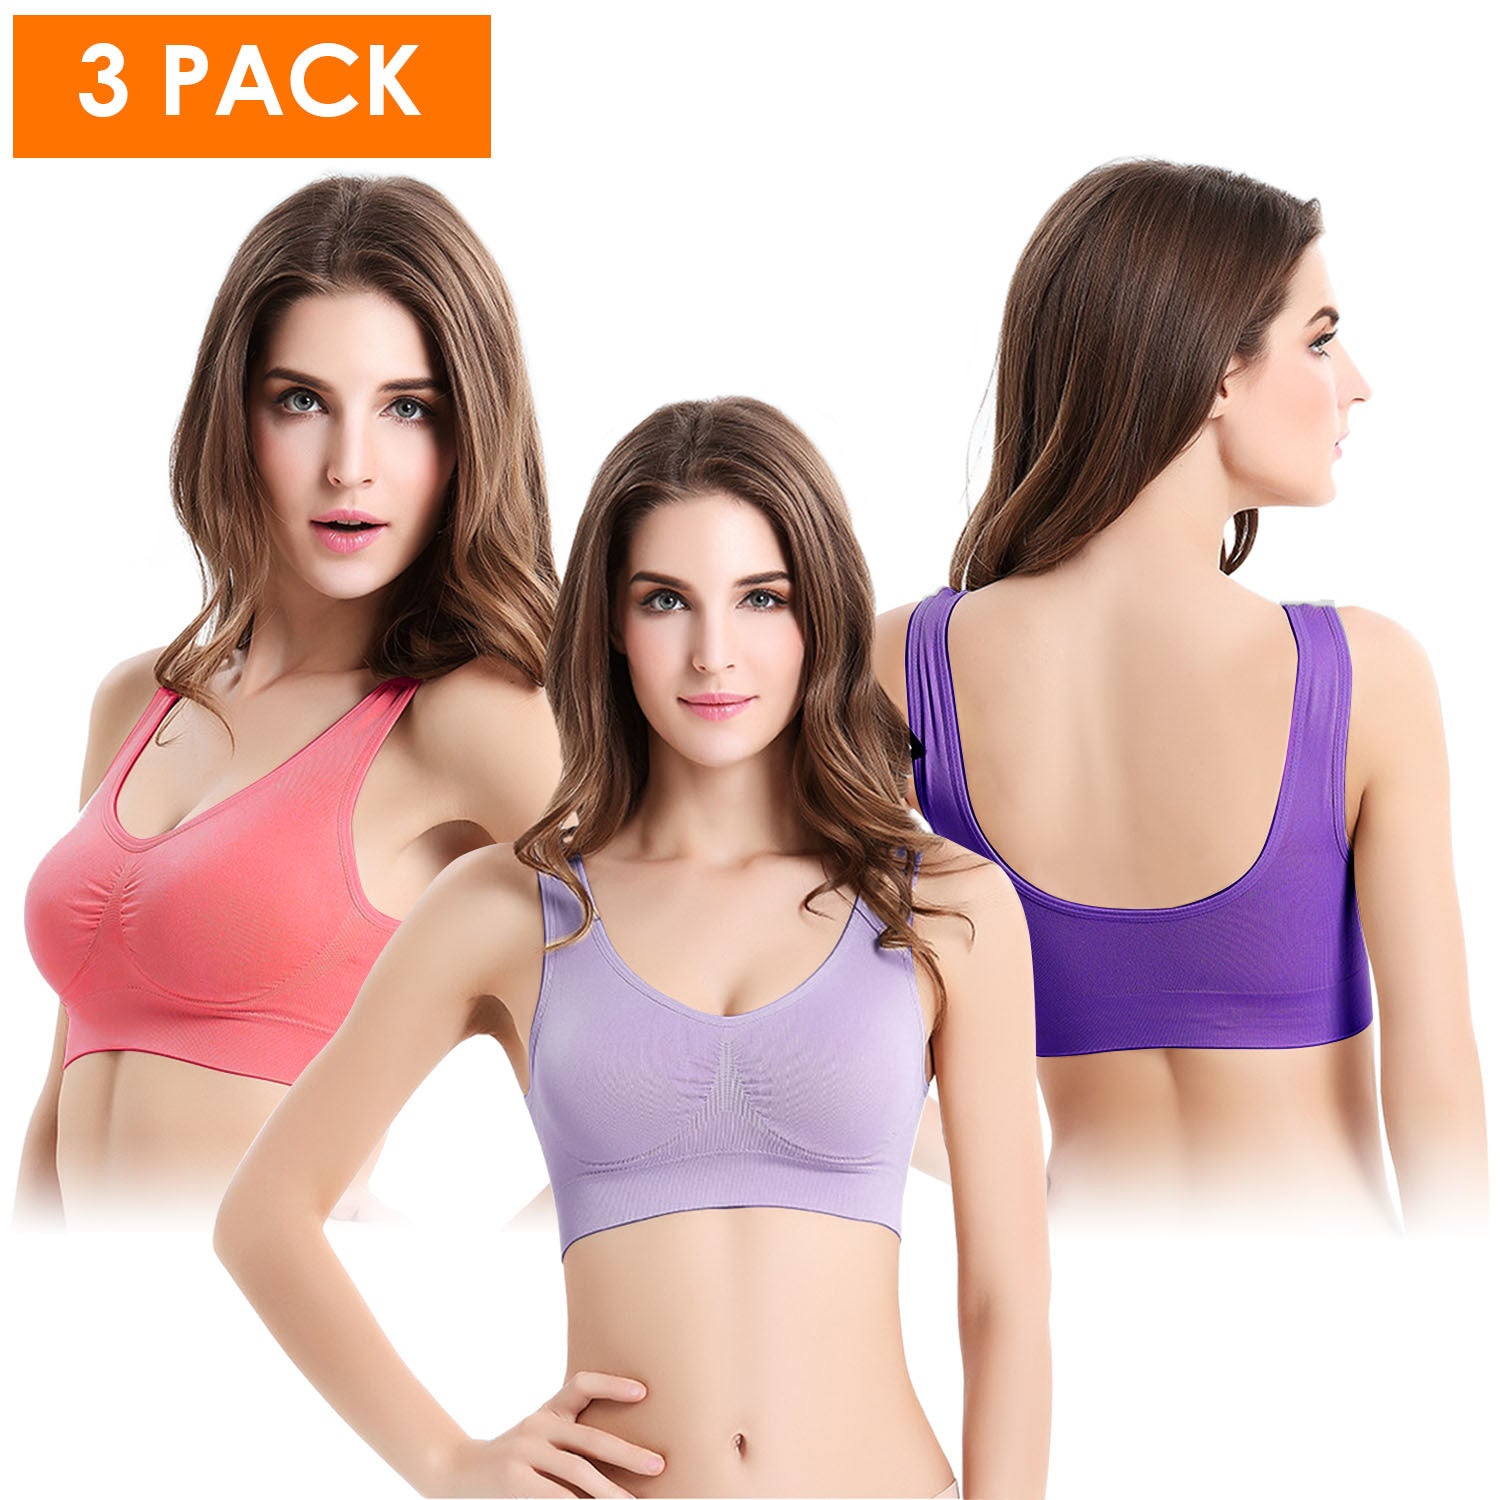 3 Pack Sport Bras For Women Seamless Wire free Bra Light Support Tank Tops For Fitness Workout Sports Yoga Sleep Wearing